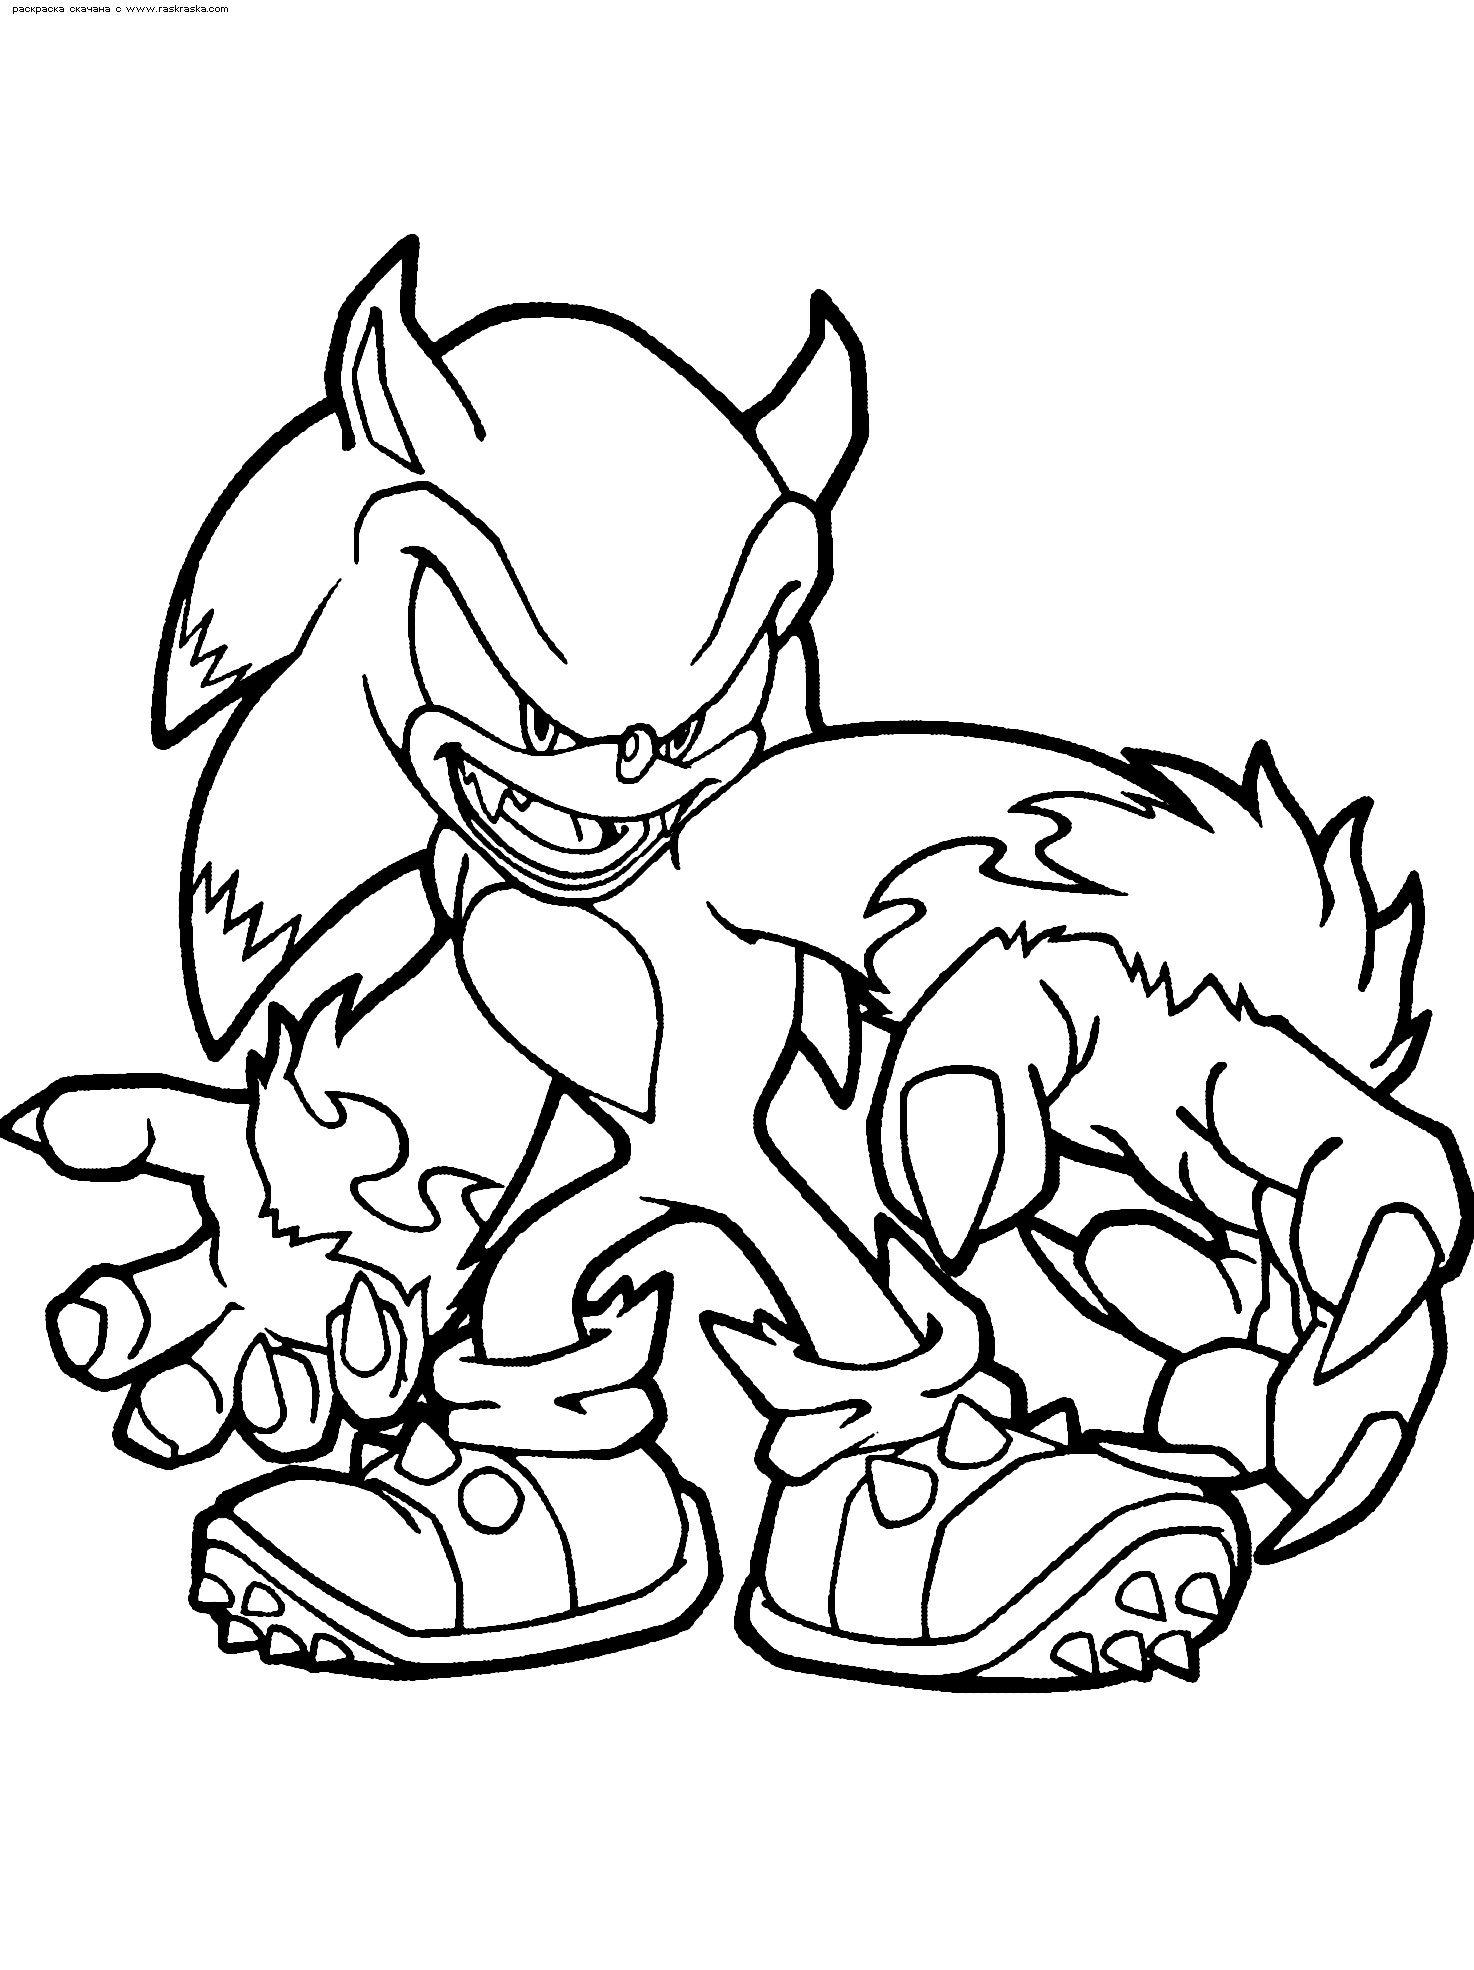  Sonic coloring pages | disney coloring pages for kids | color pages | coloring pages to print | kids coloring pages | #42